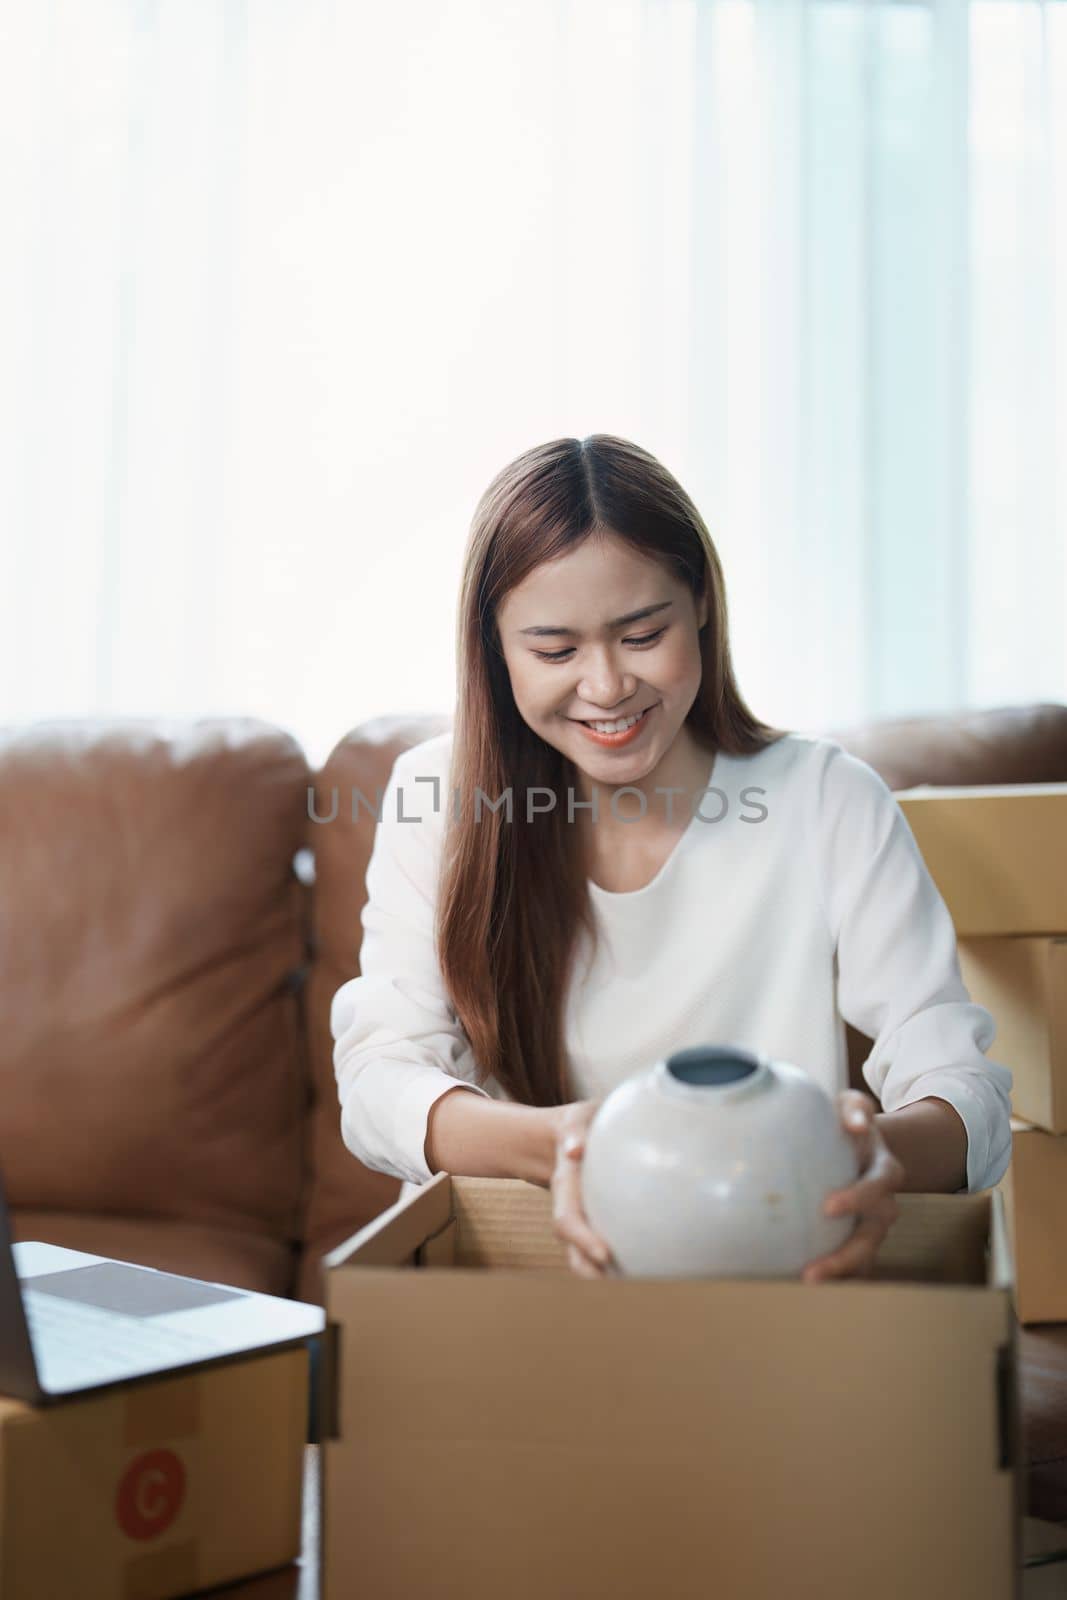 Starting small business entrepreneur of independent young Asian woman online seller using a computer showing products to a customer before making a purchase decision. SME delivery concept by Manastrong